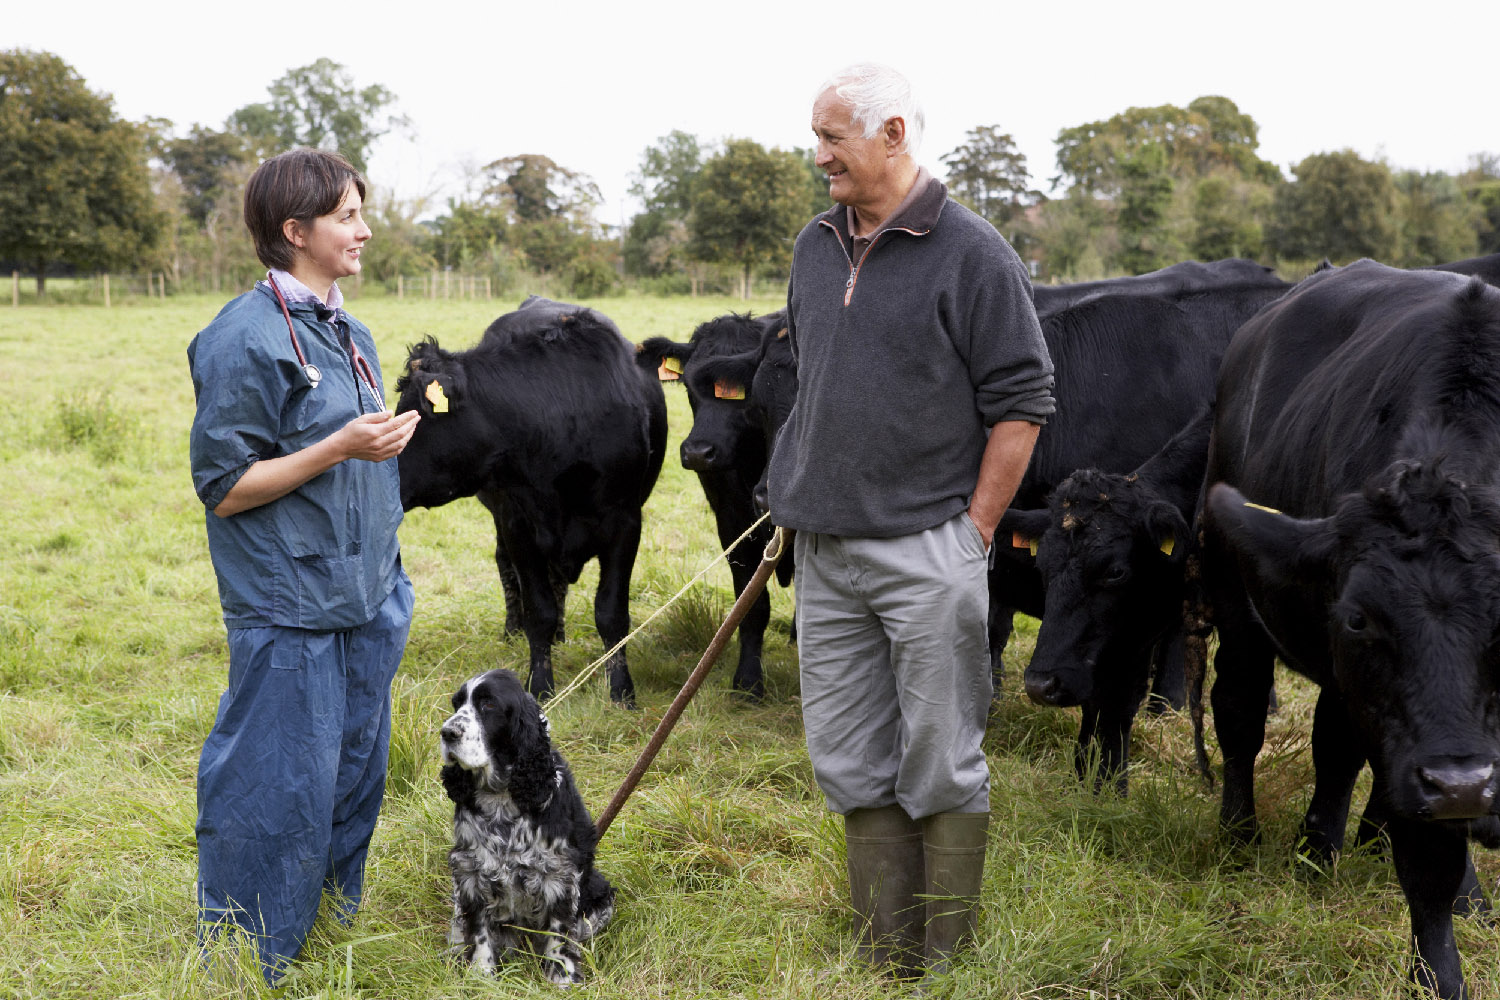 Veterinarian talks with producer holding his leashed dog with his black beef cattle in a field.